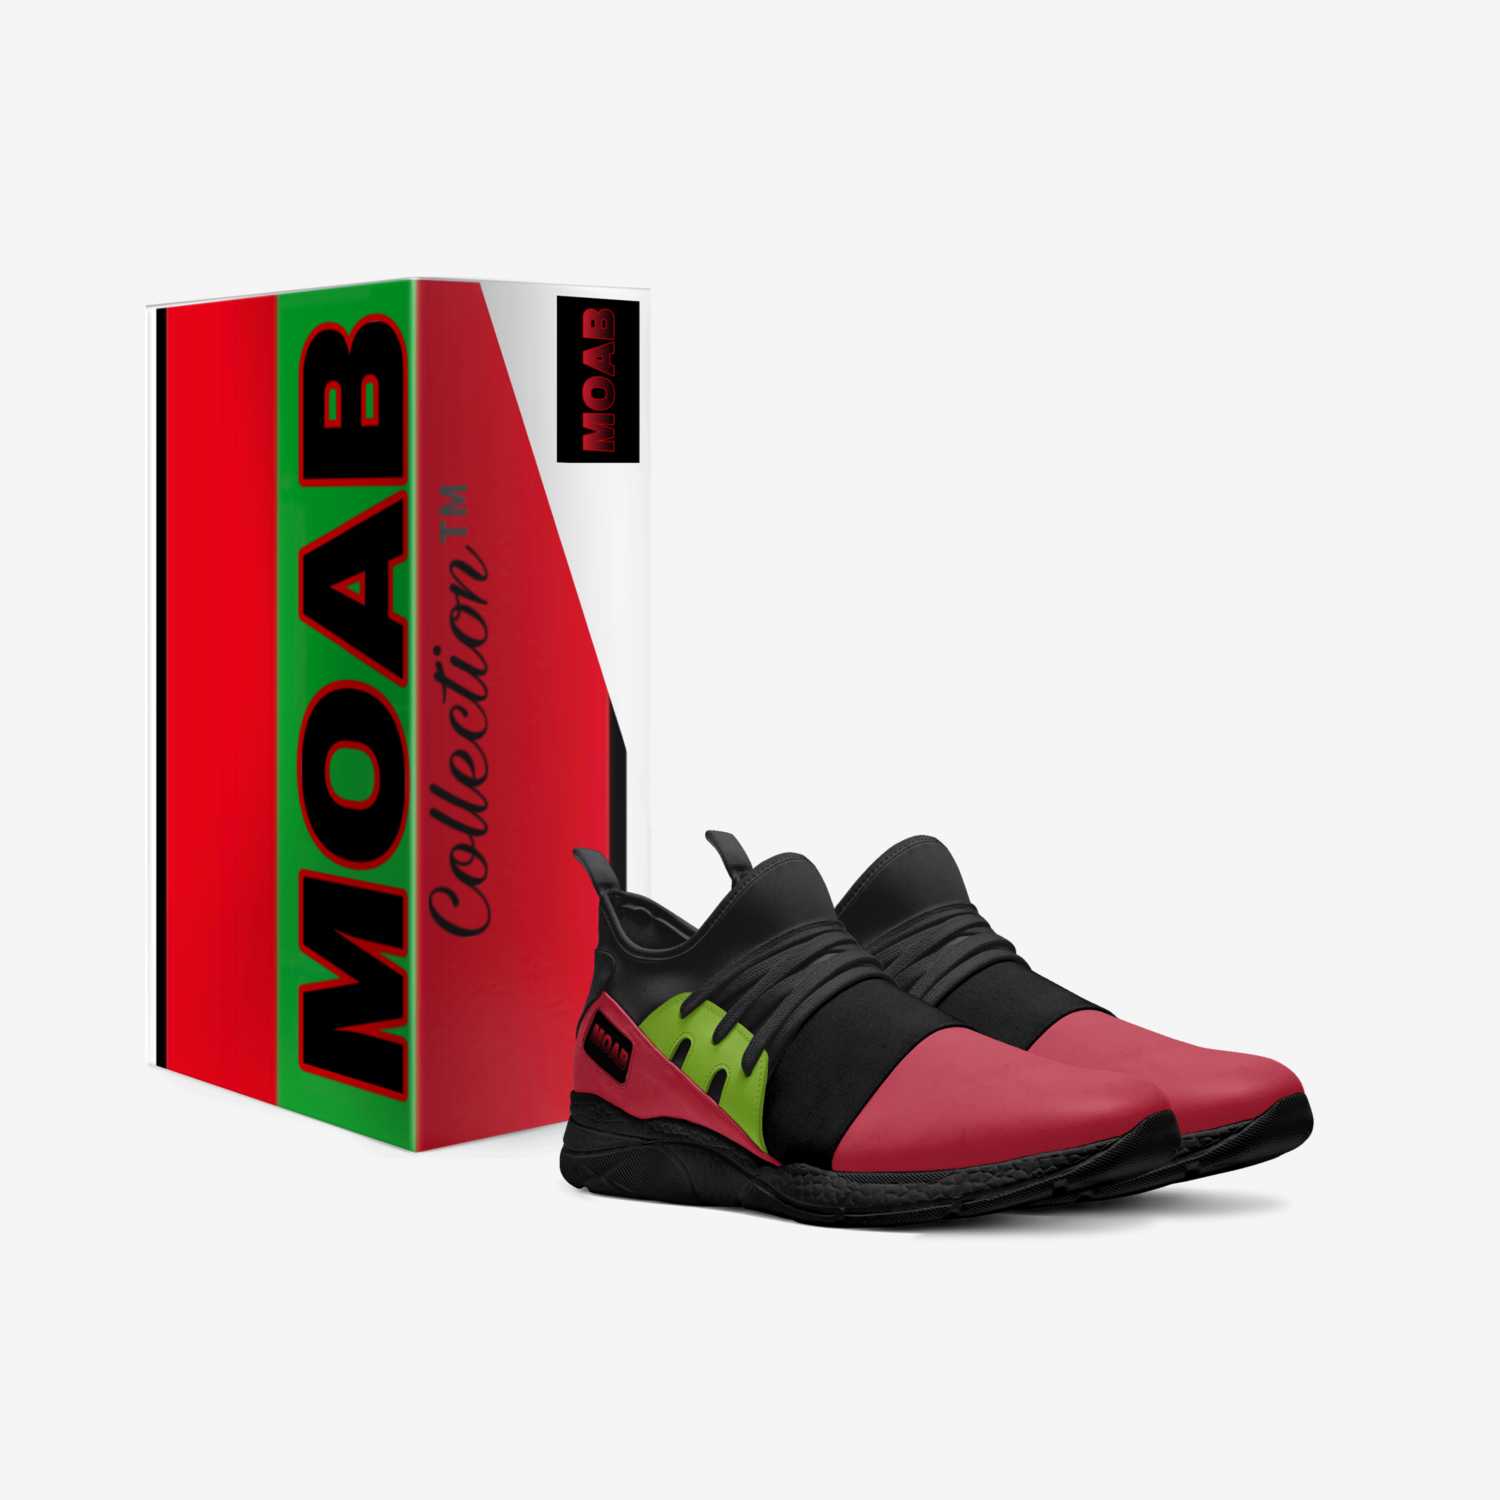 MOAB custom made in Italy shoes by Nasir Ma'At-el | Box view